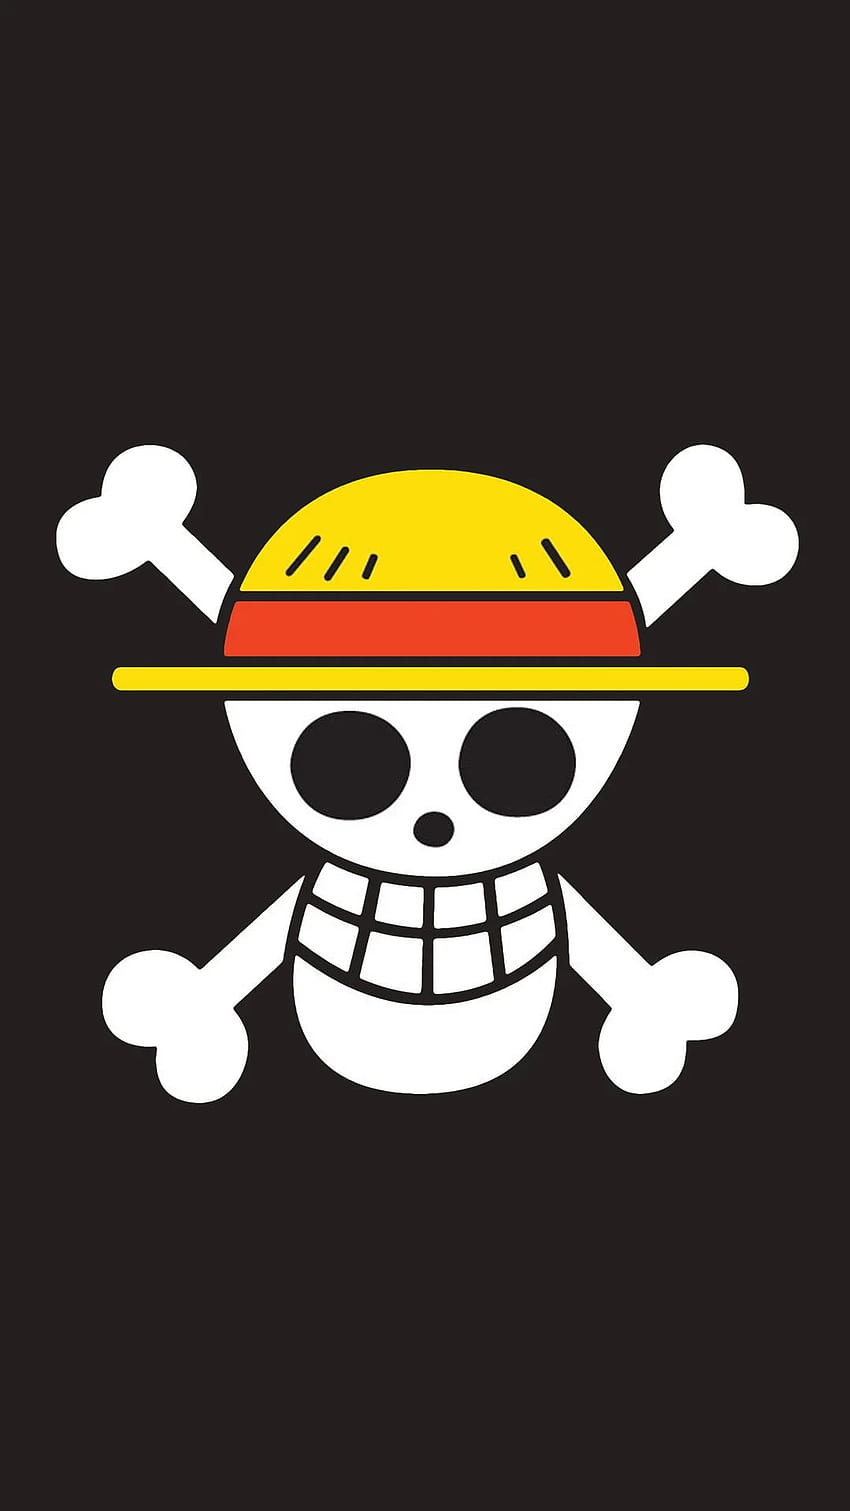 ONE PIECE HQ ワンピース[iPhone用]. One piece logo, One piece iphone, One piece luffy HD phone wallpaper